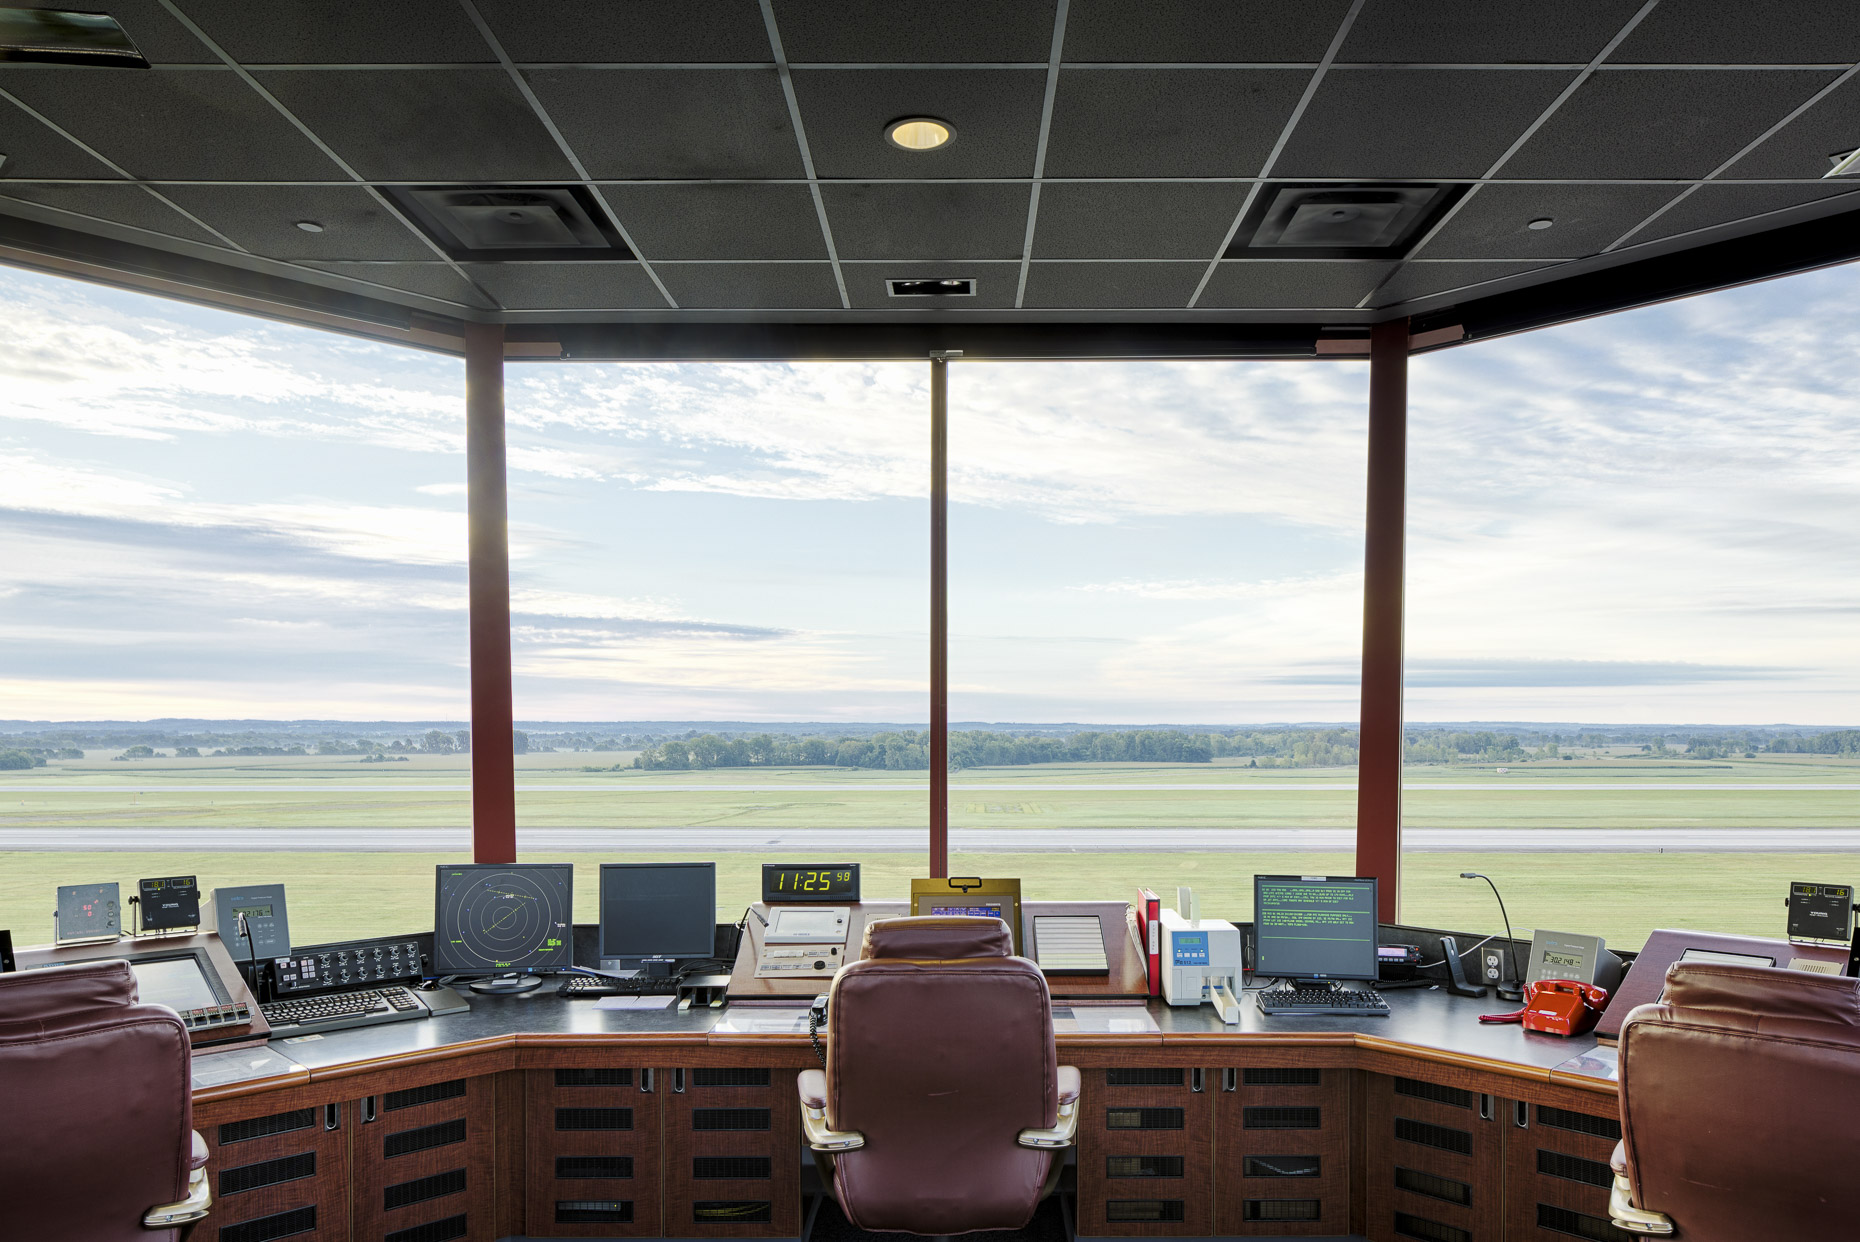 Rickenbacker International Airport ATC Tower by Smoot Construction photographed by Lauren K Davis based in Columbus, Ohio